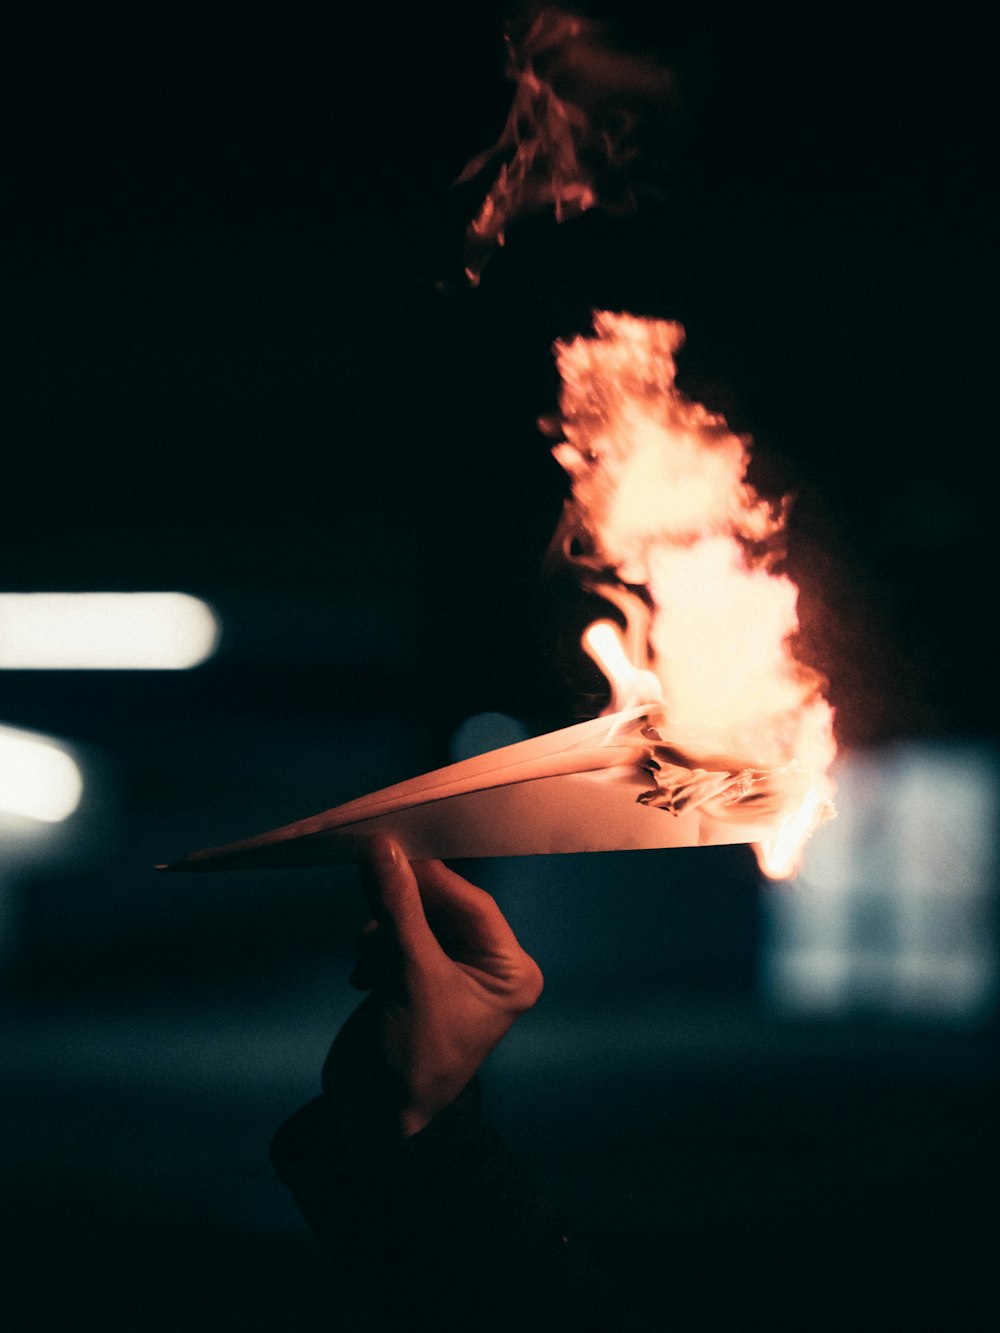 person holding fire during nighttime